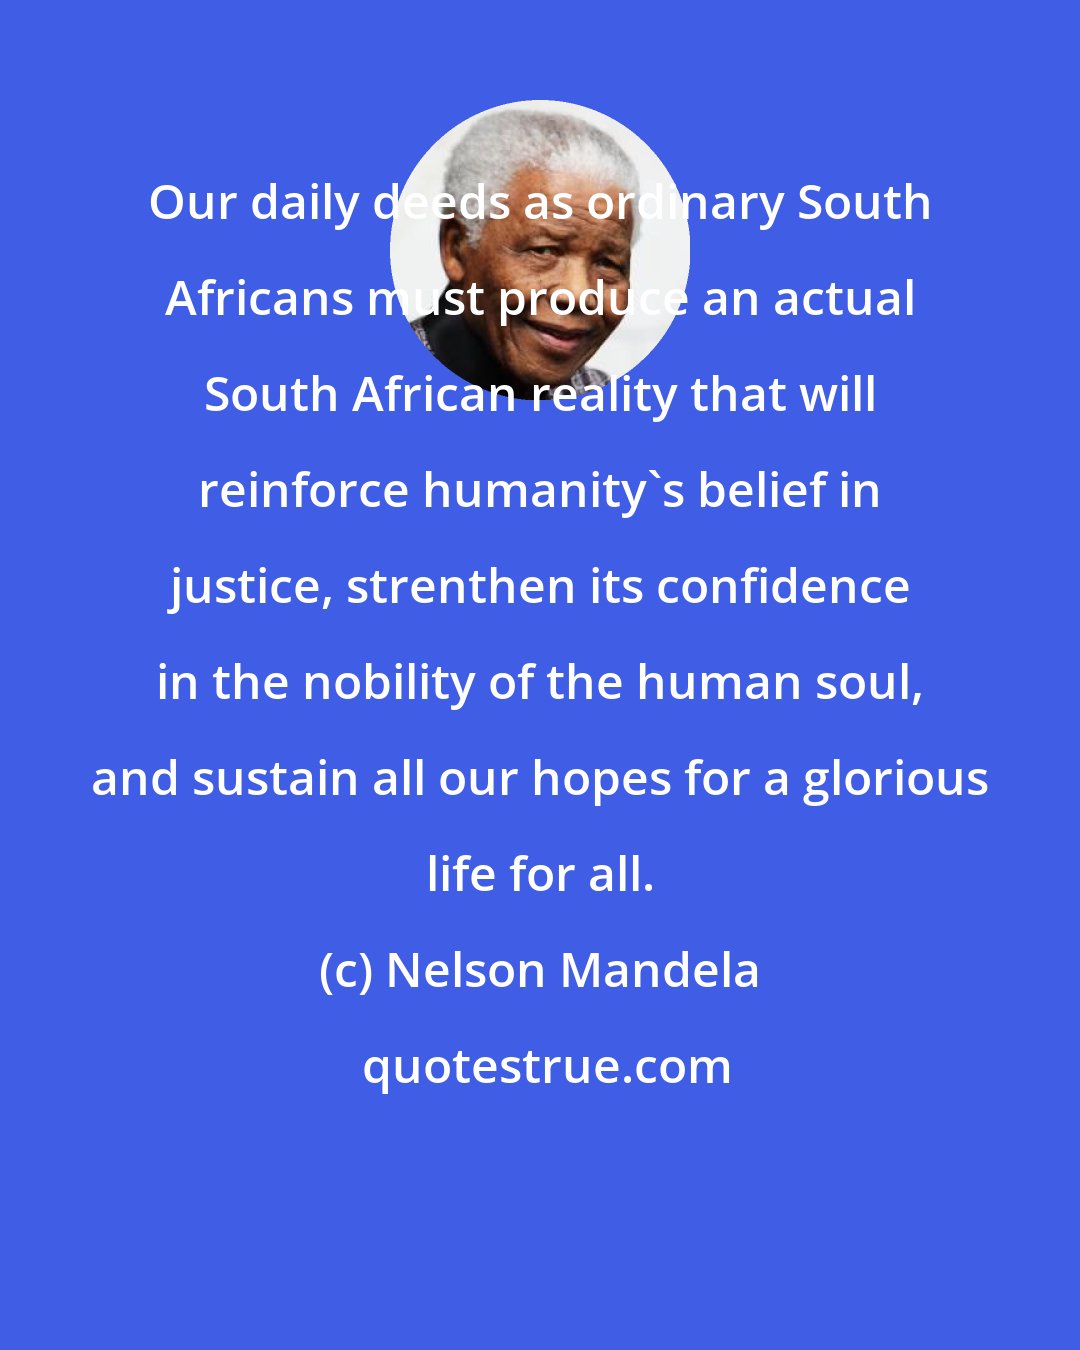 Nelson Mandela: Our daily deeds as ordinary South Africans must produce an actual South African reality that will reinforce humanity's belief in justice, strenthen its confidence in the nobility of the human soul, and sustain all our hopes for a glorious life for all.